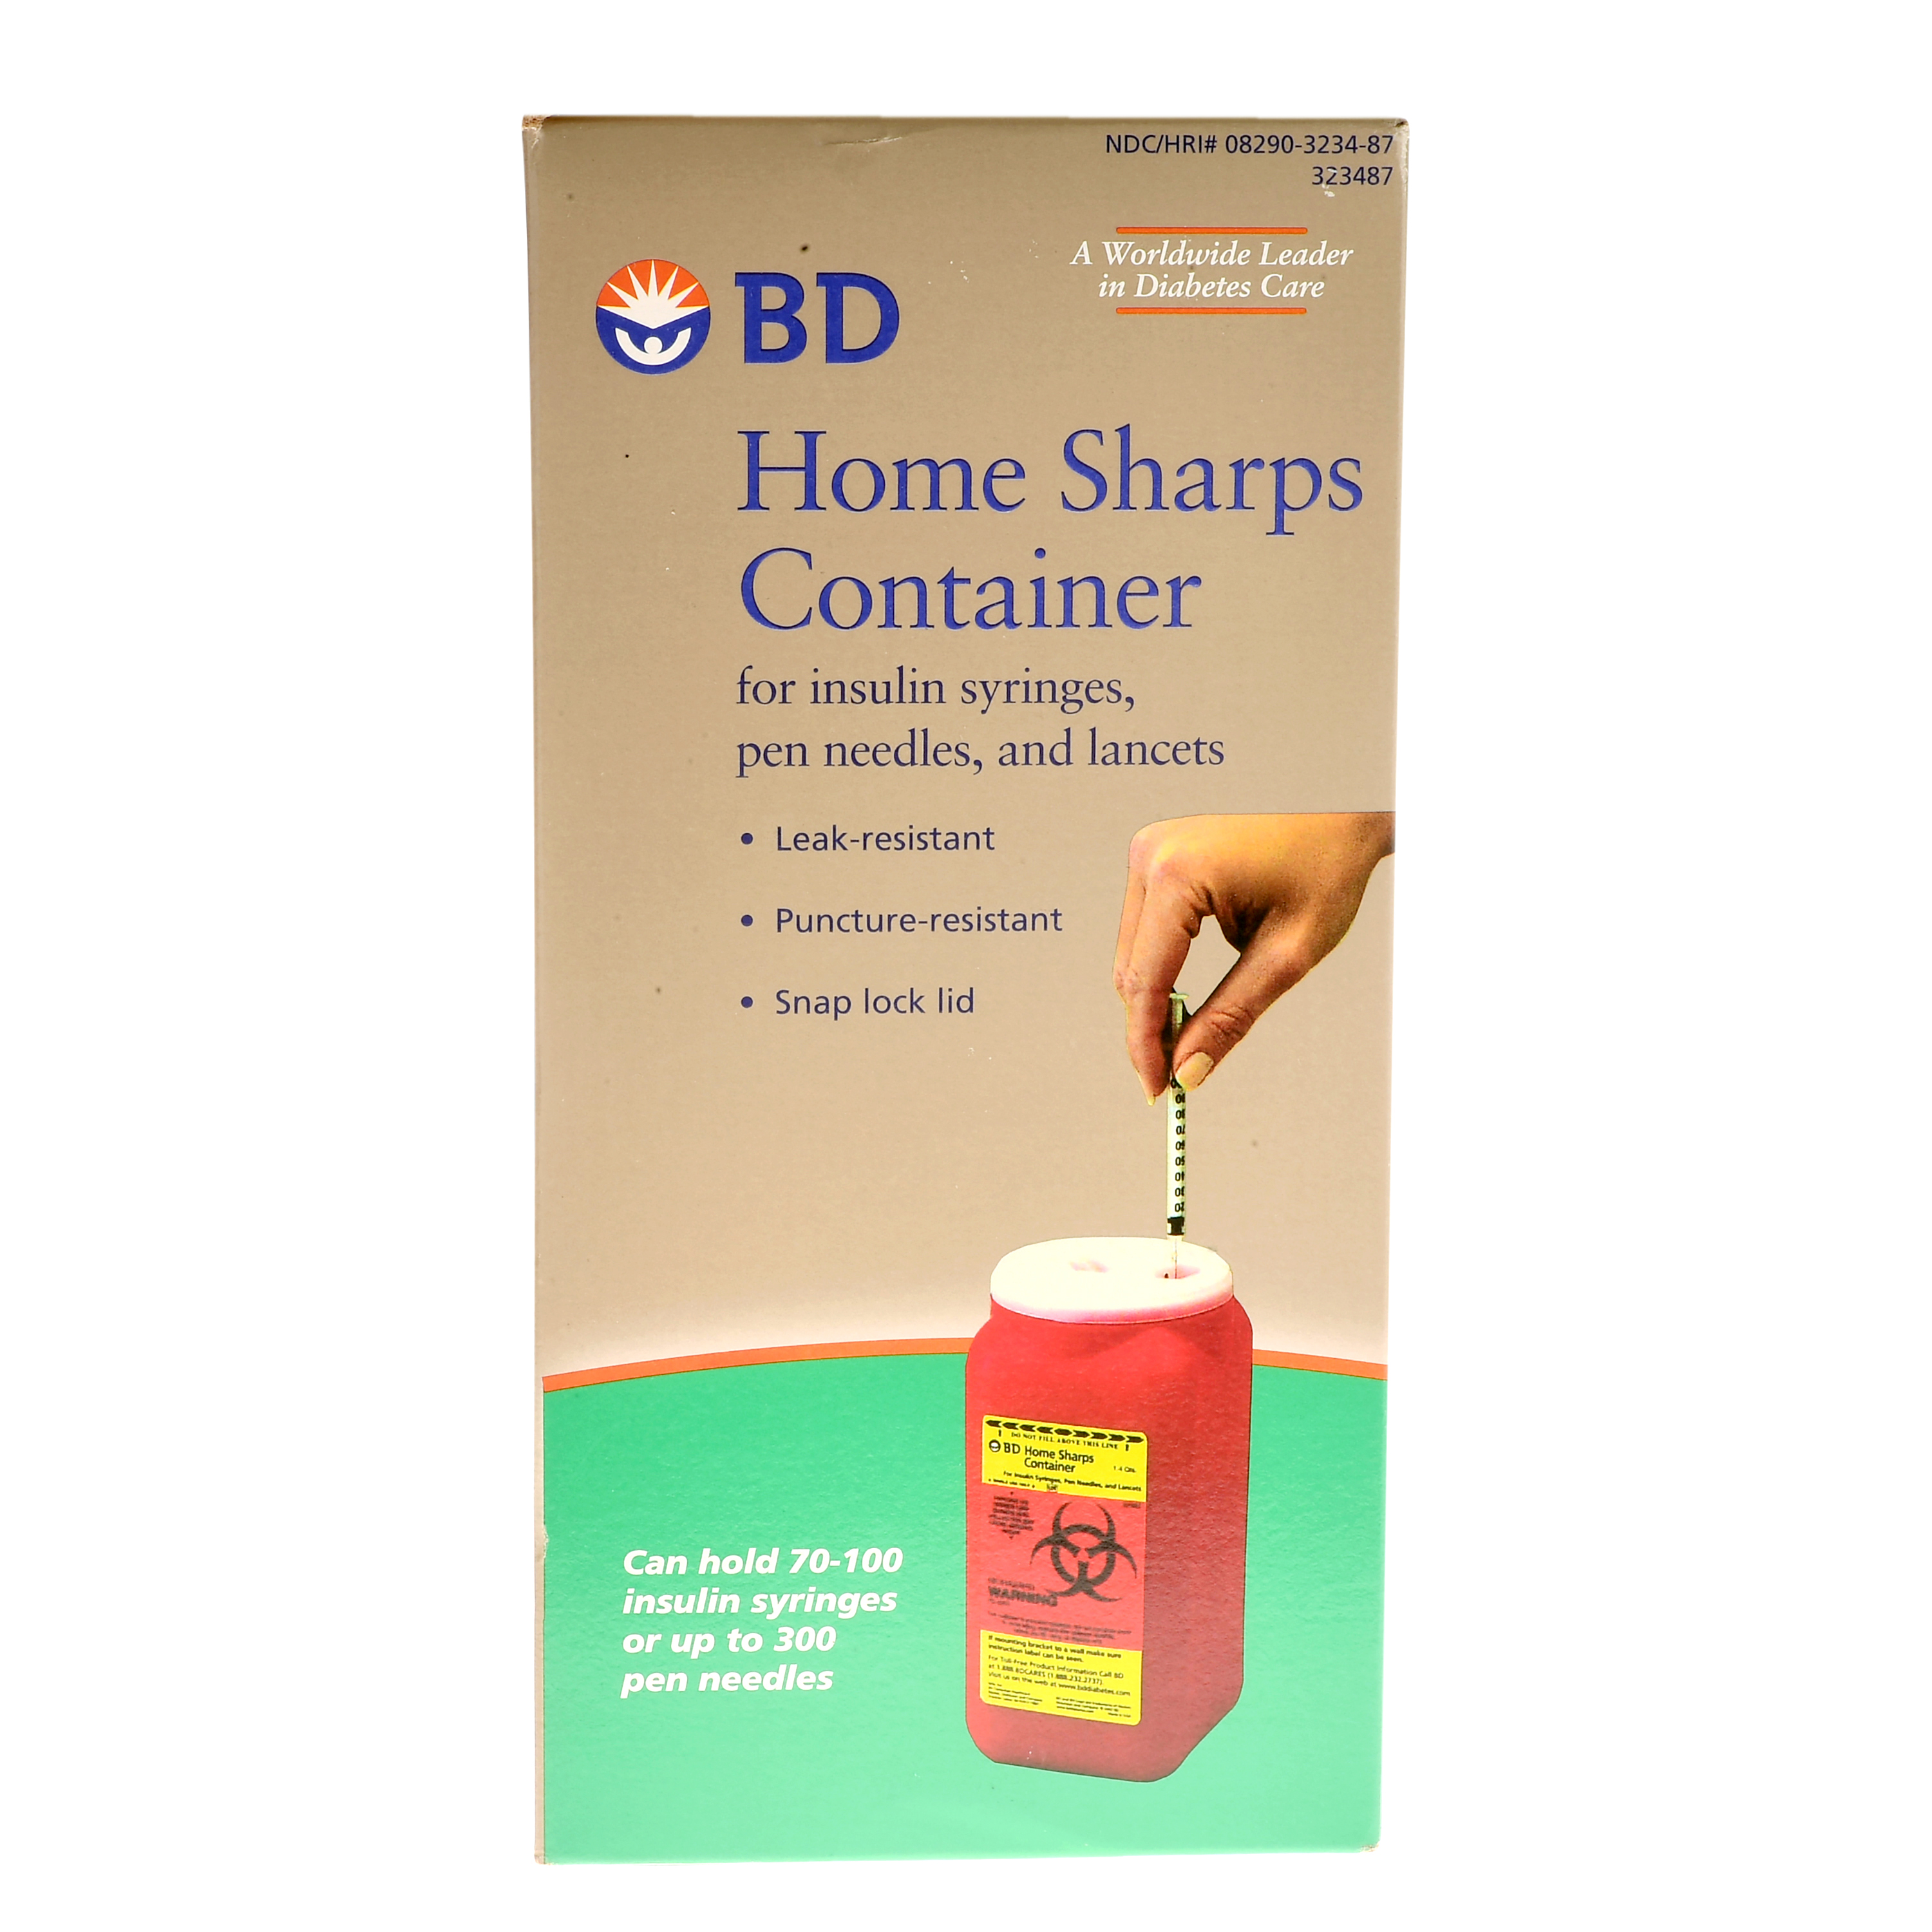 BD Home Sharps Container - image 3 of 5